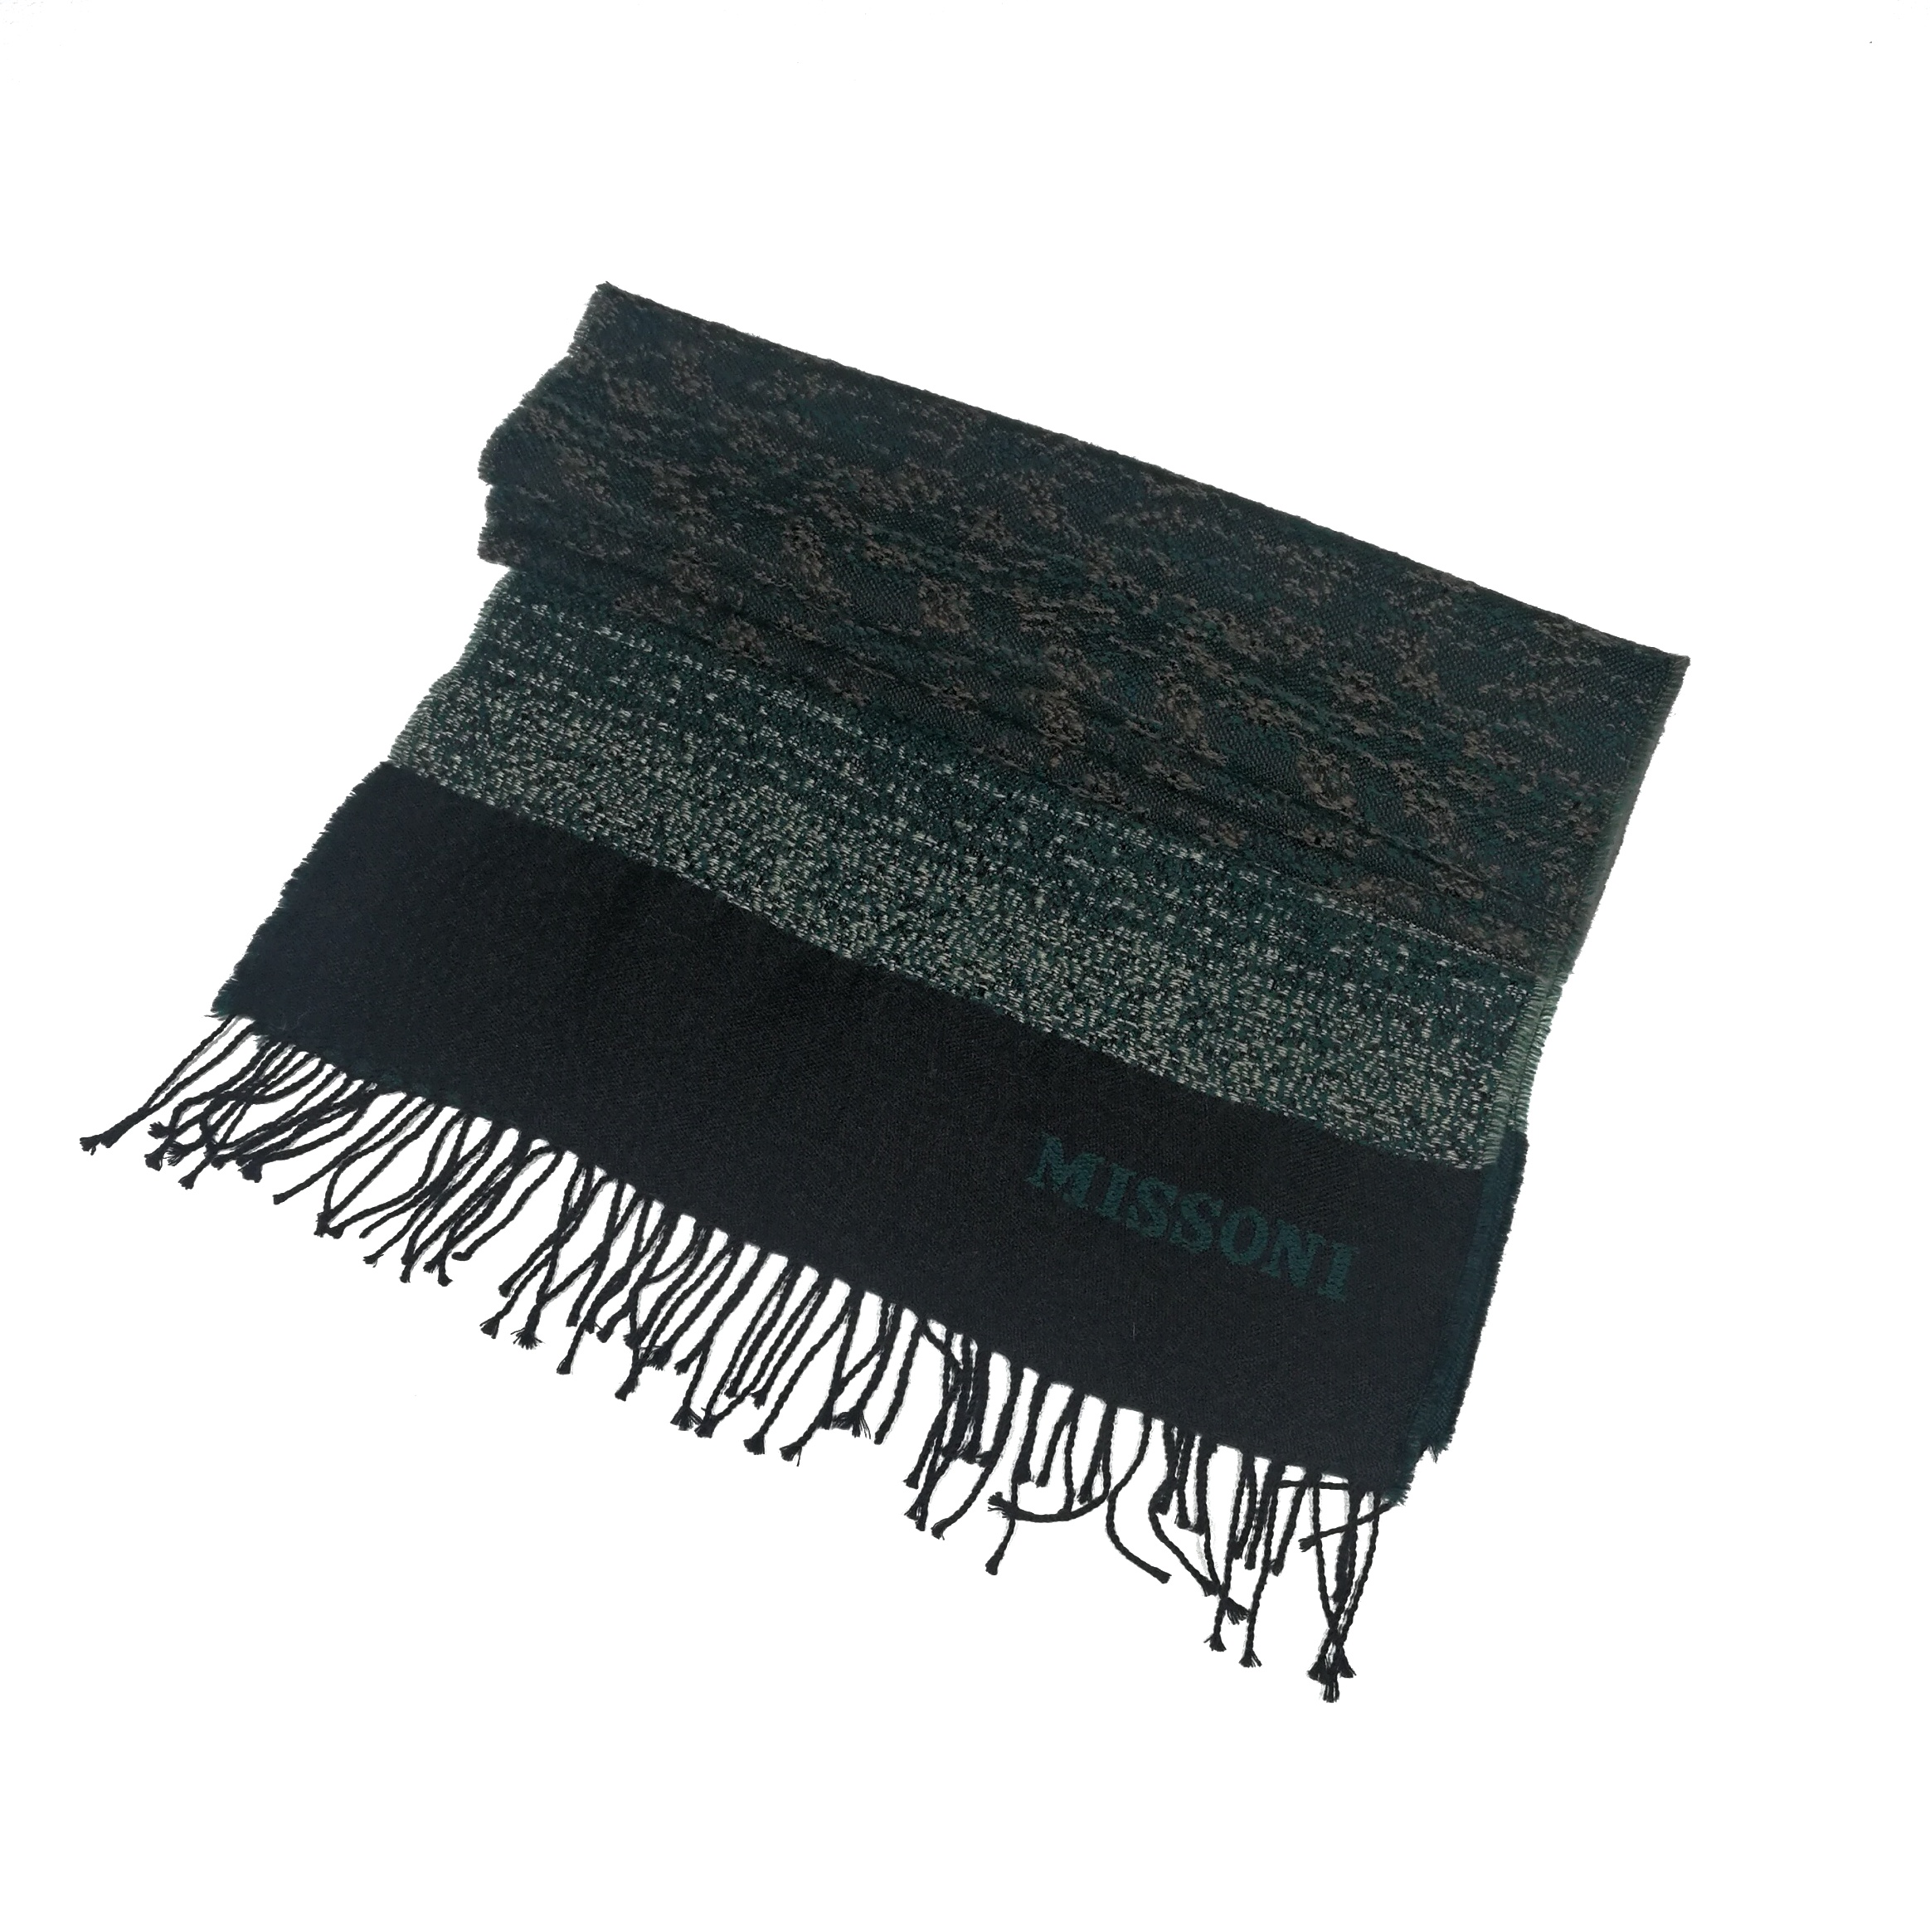 Hot Sale!! Missoni wool scarf very good conditions (SB015) - 2